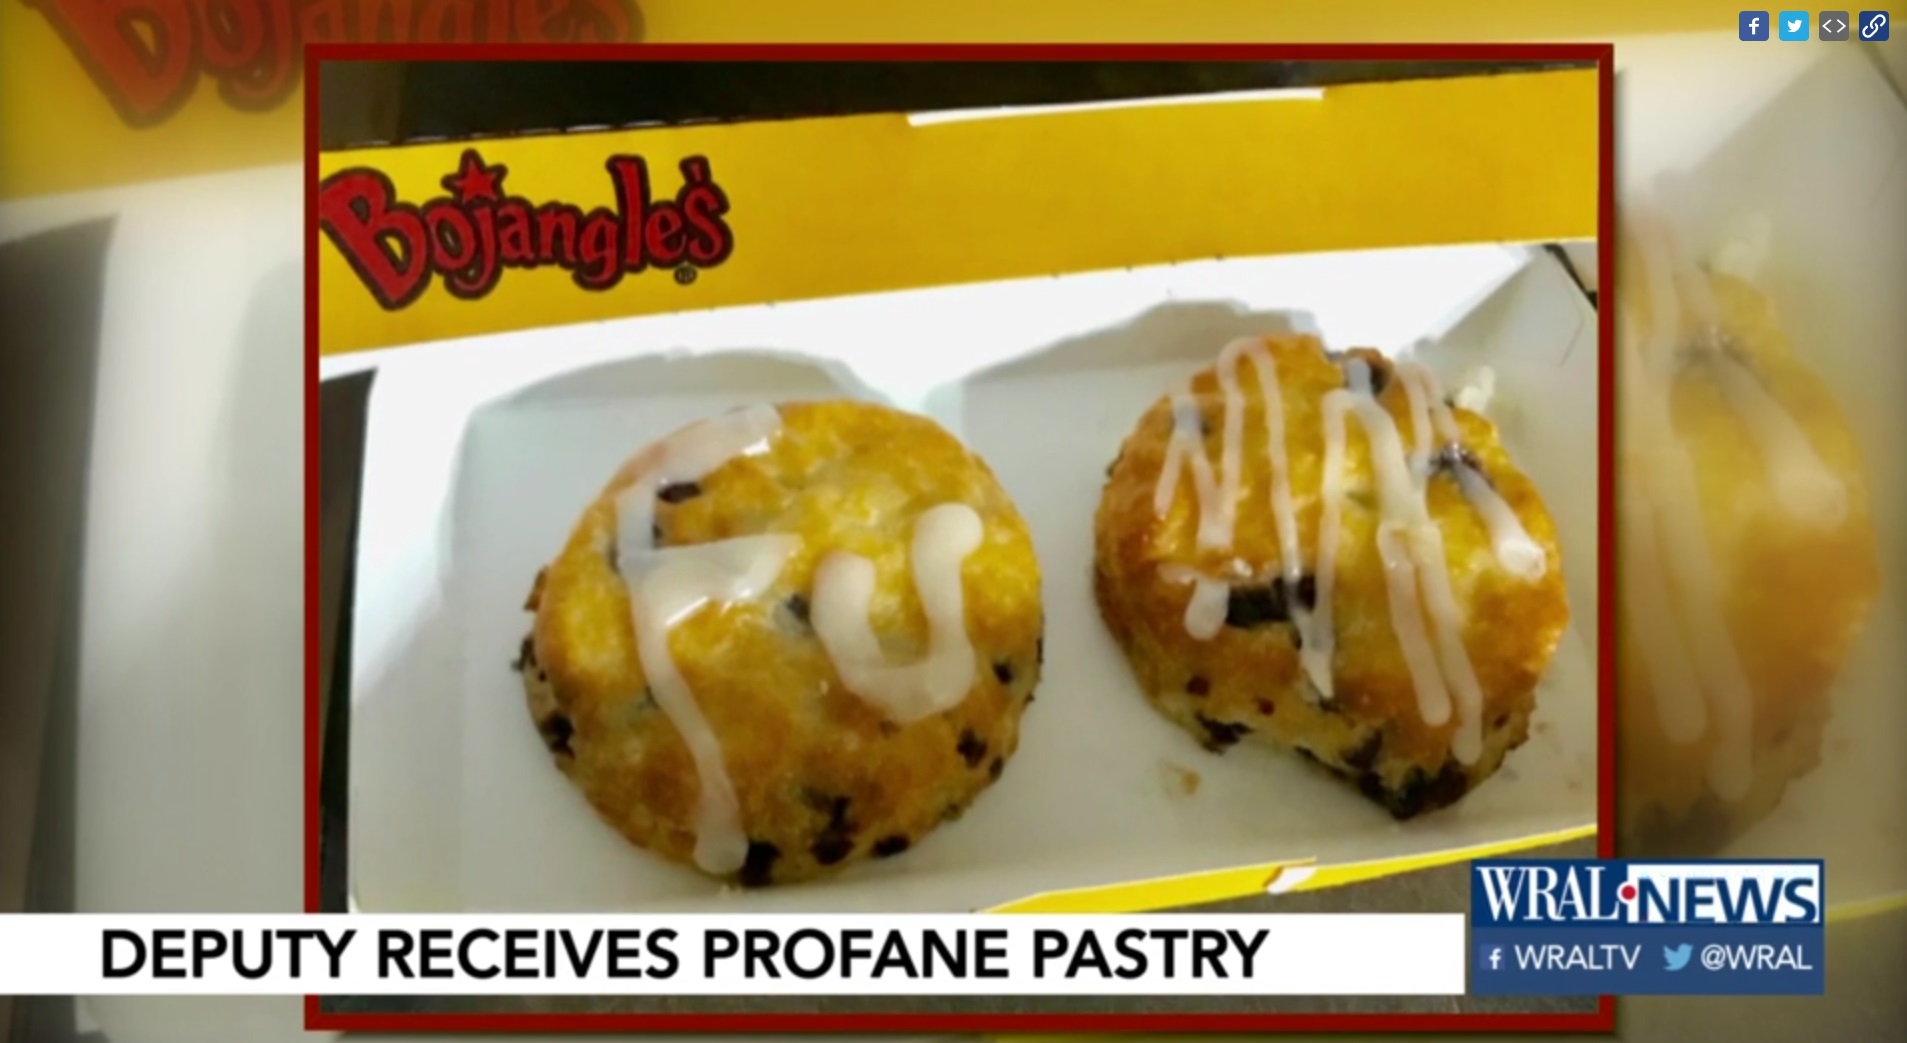 "Deputy Receives Profane Pastry" (The pastry reads 'FU")